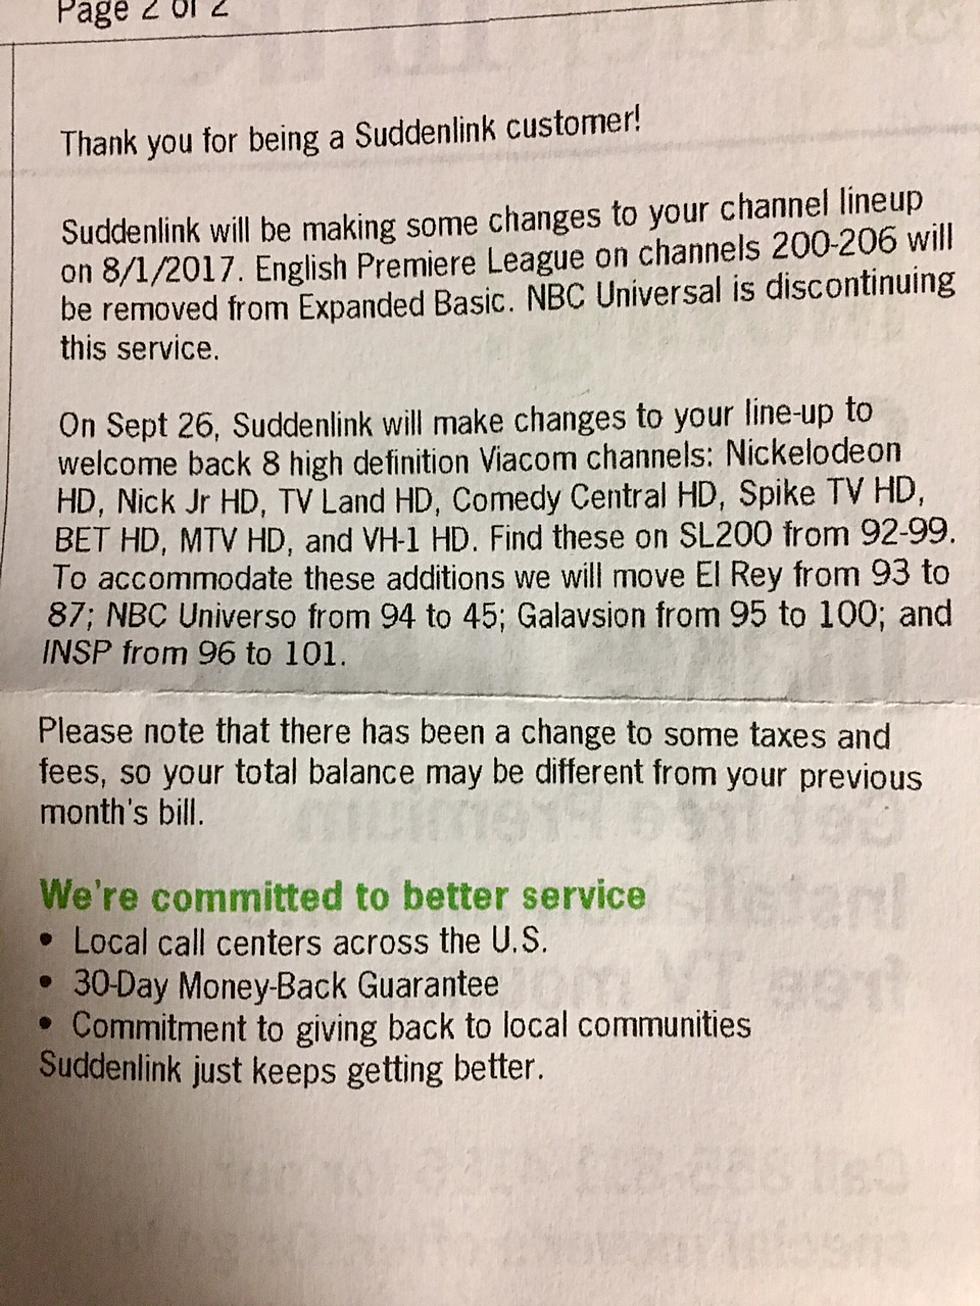 Big News in the Fine Print — Suddenlink Brings Back 8 HD Channels